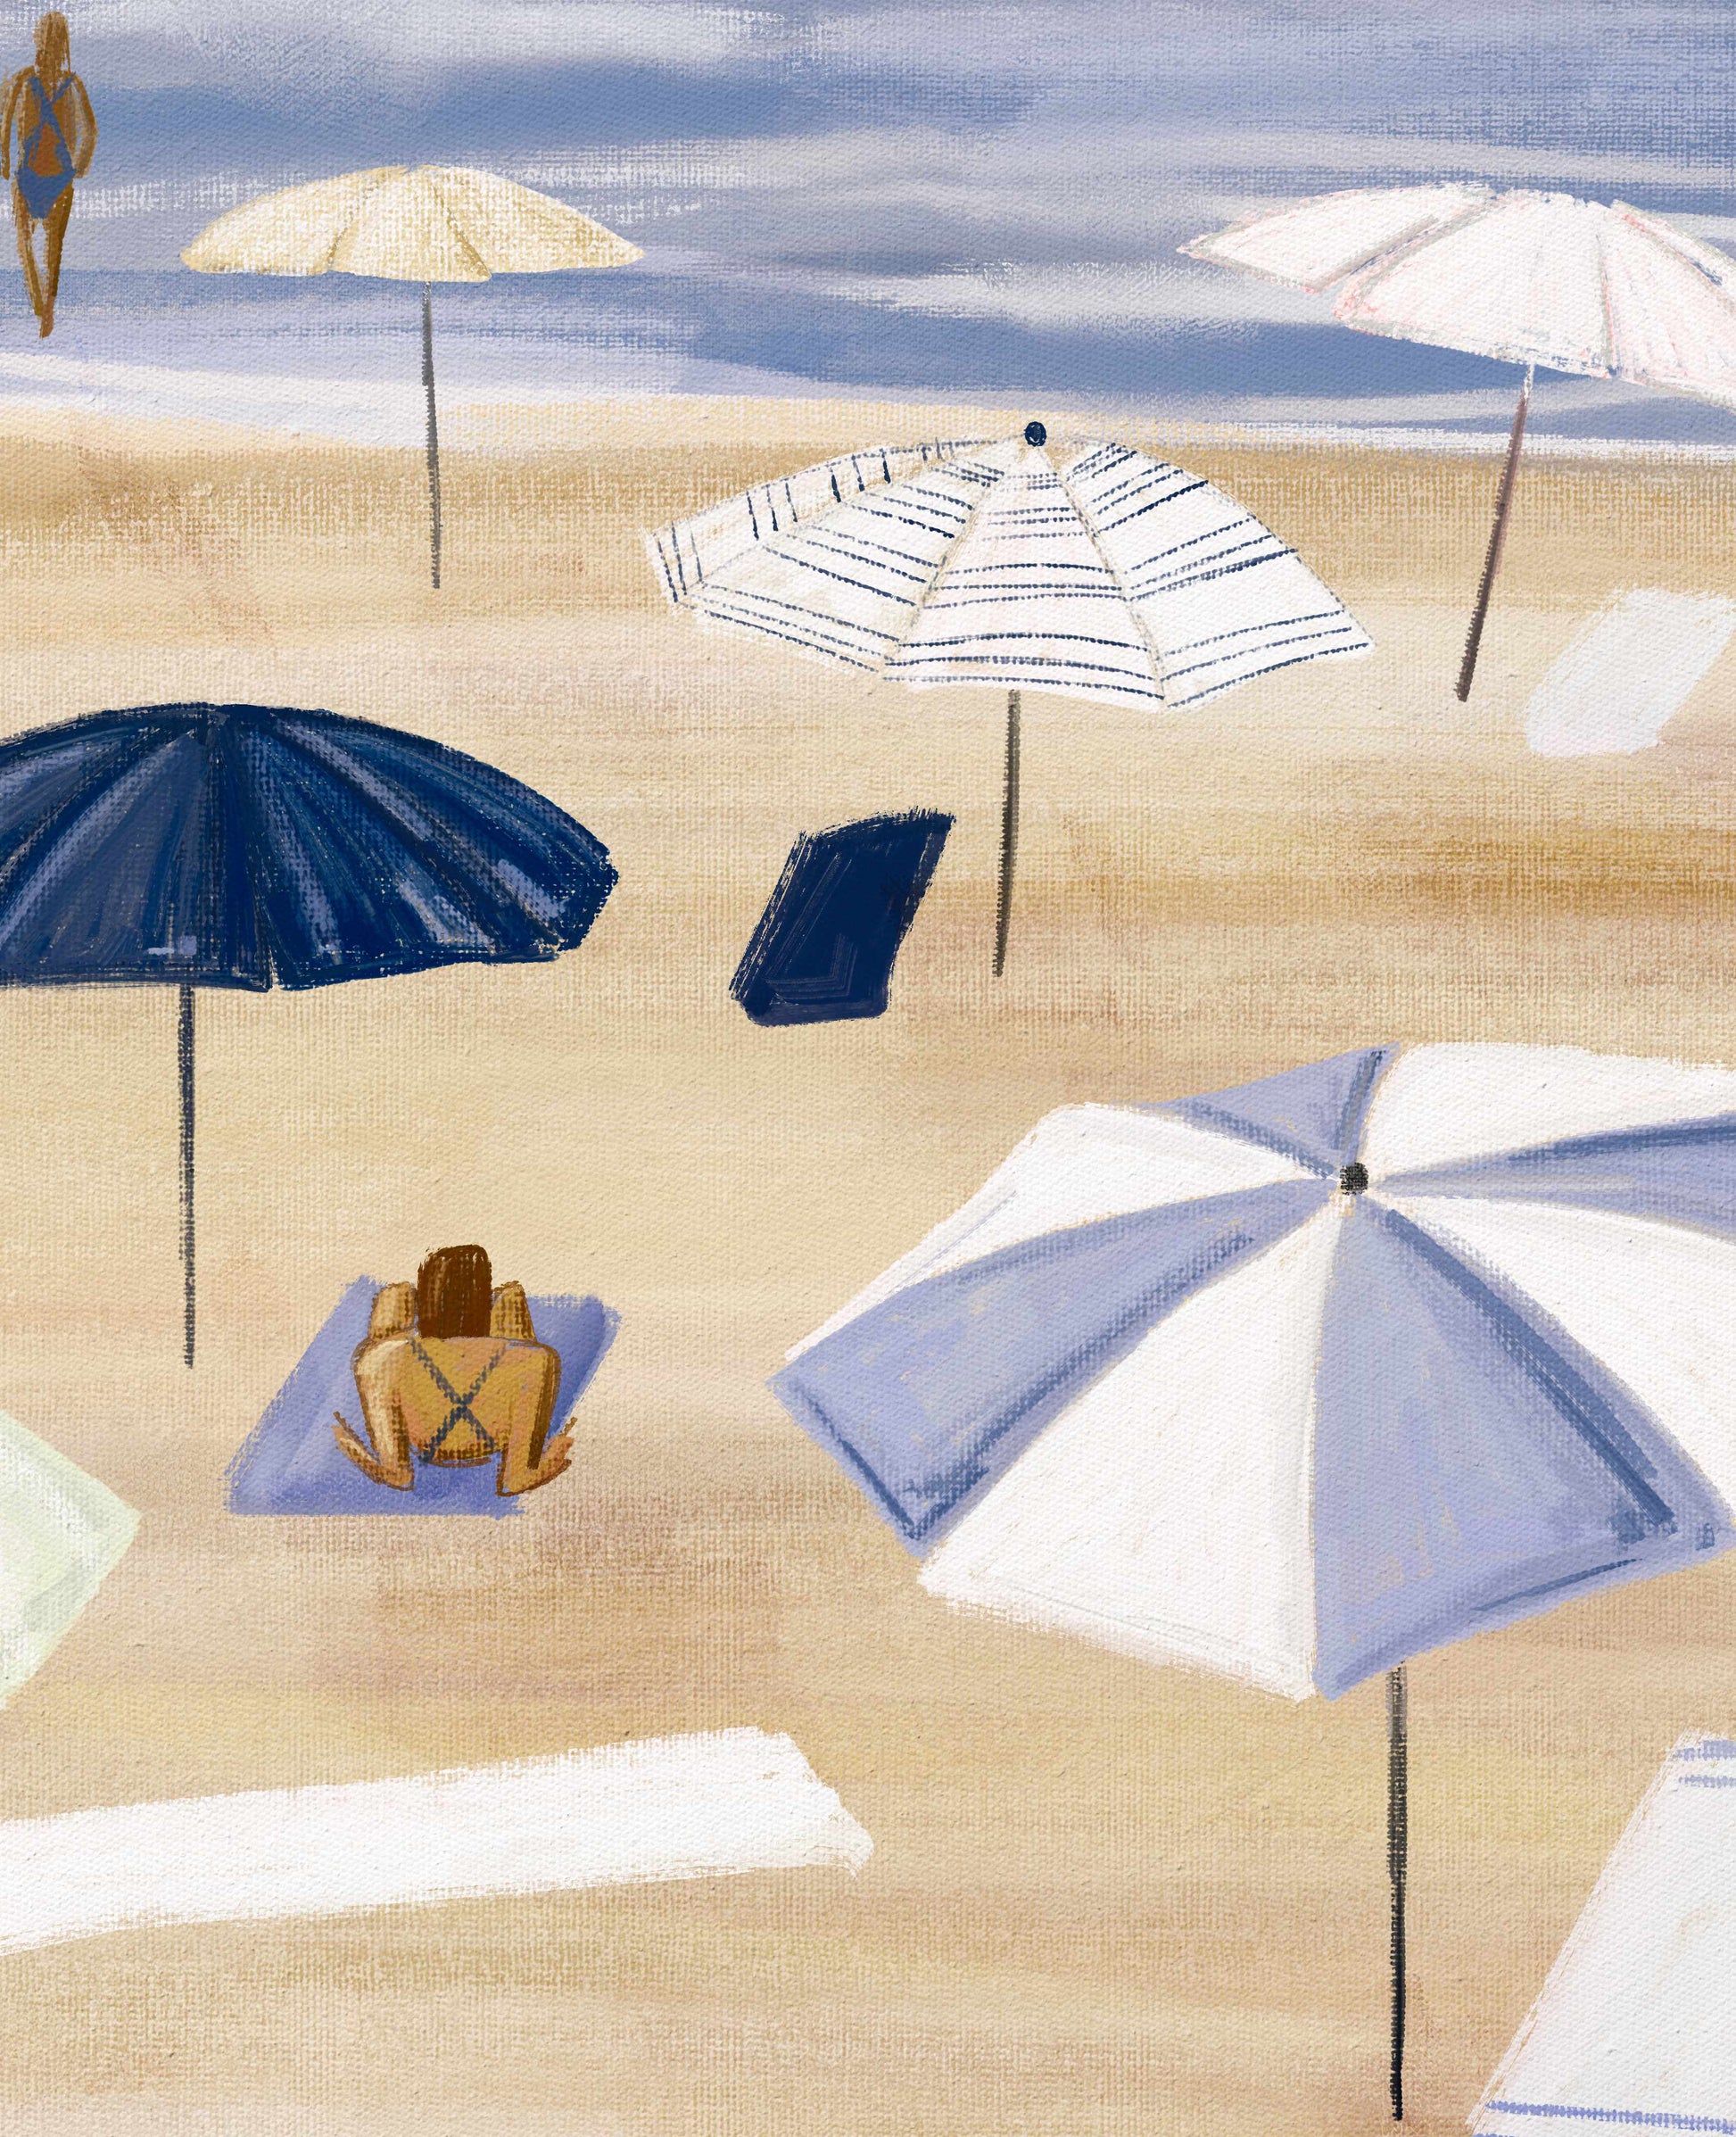 a painting of people sitting on the beach under umbrellas